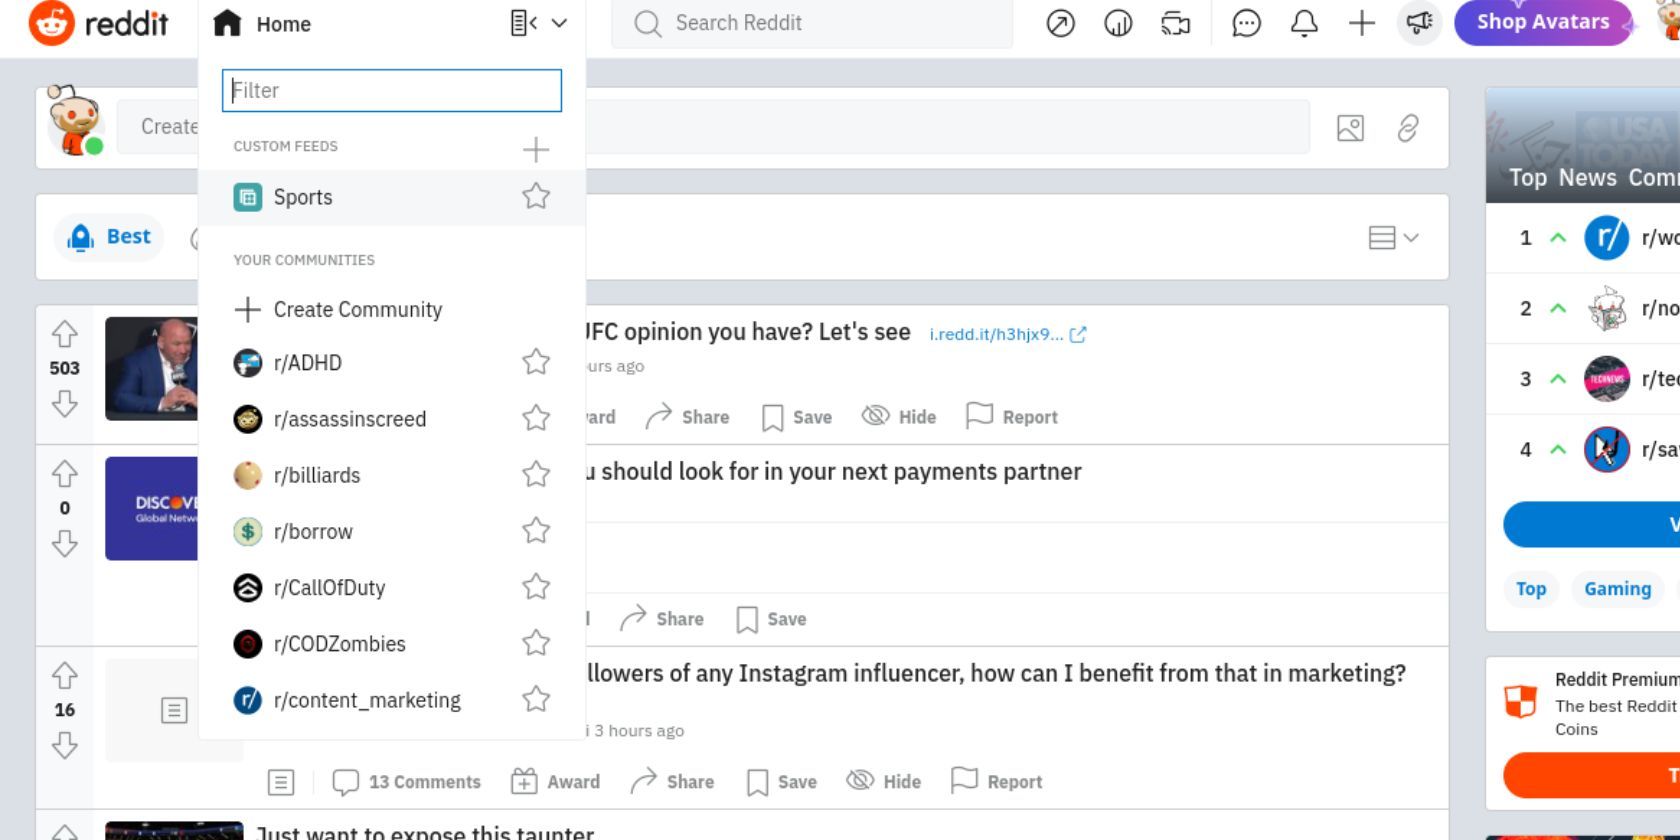 The home page of Reddit with different views available at the top